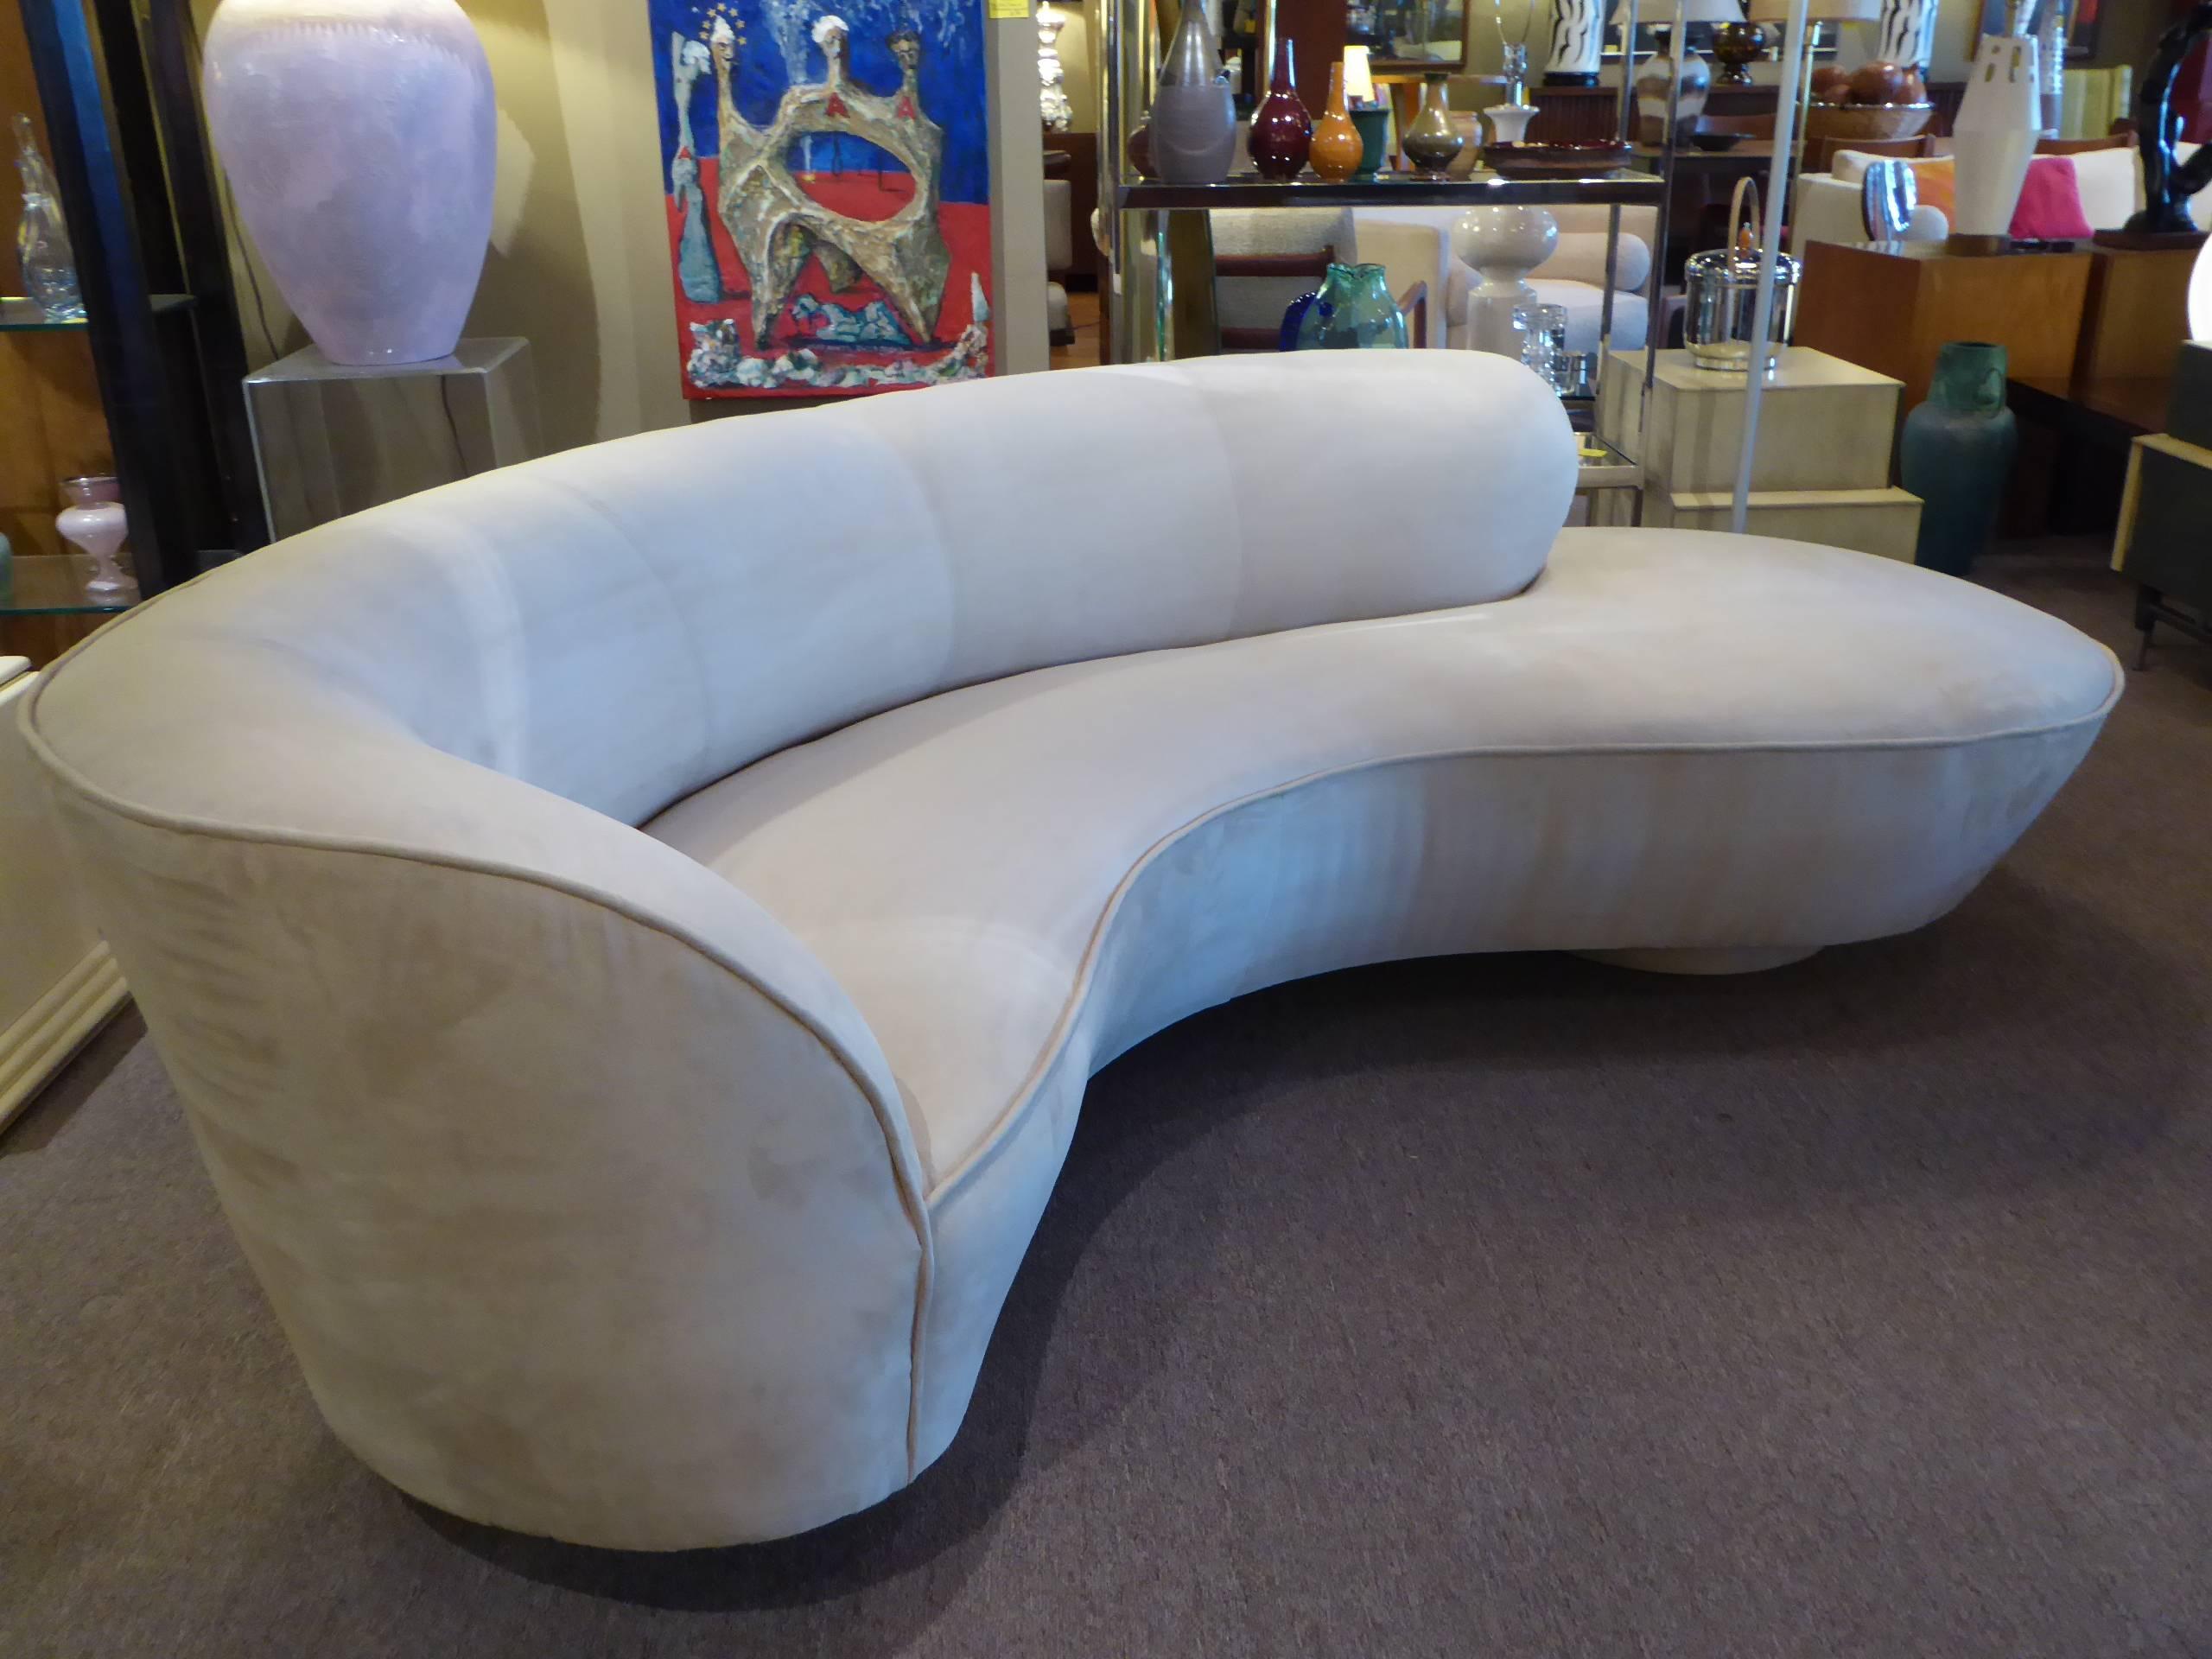 Sumptuous and iconic serpentine sofa by Vladimir Kagan for Directional. The sofa raised on two round, upholstered discs with extra support provided by a center Lucite slab. With Directional tag on underside. Newly upholstered in creamy ultrasuede,